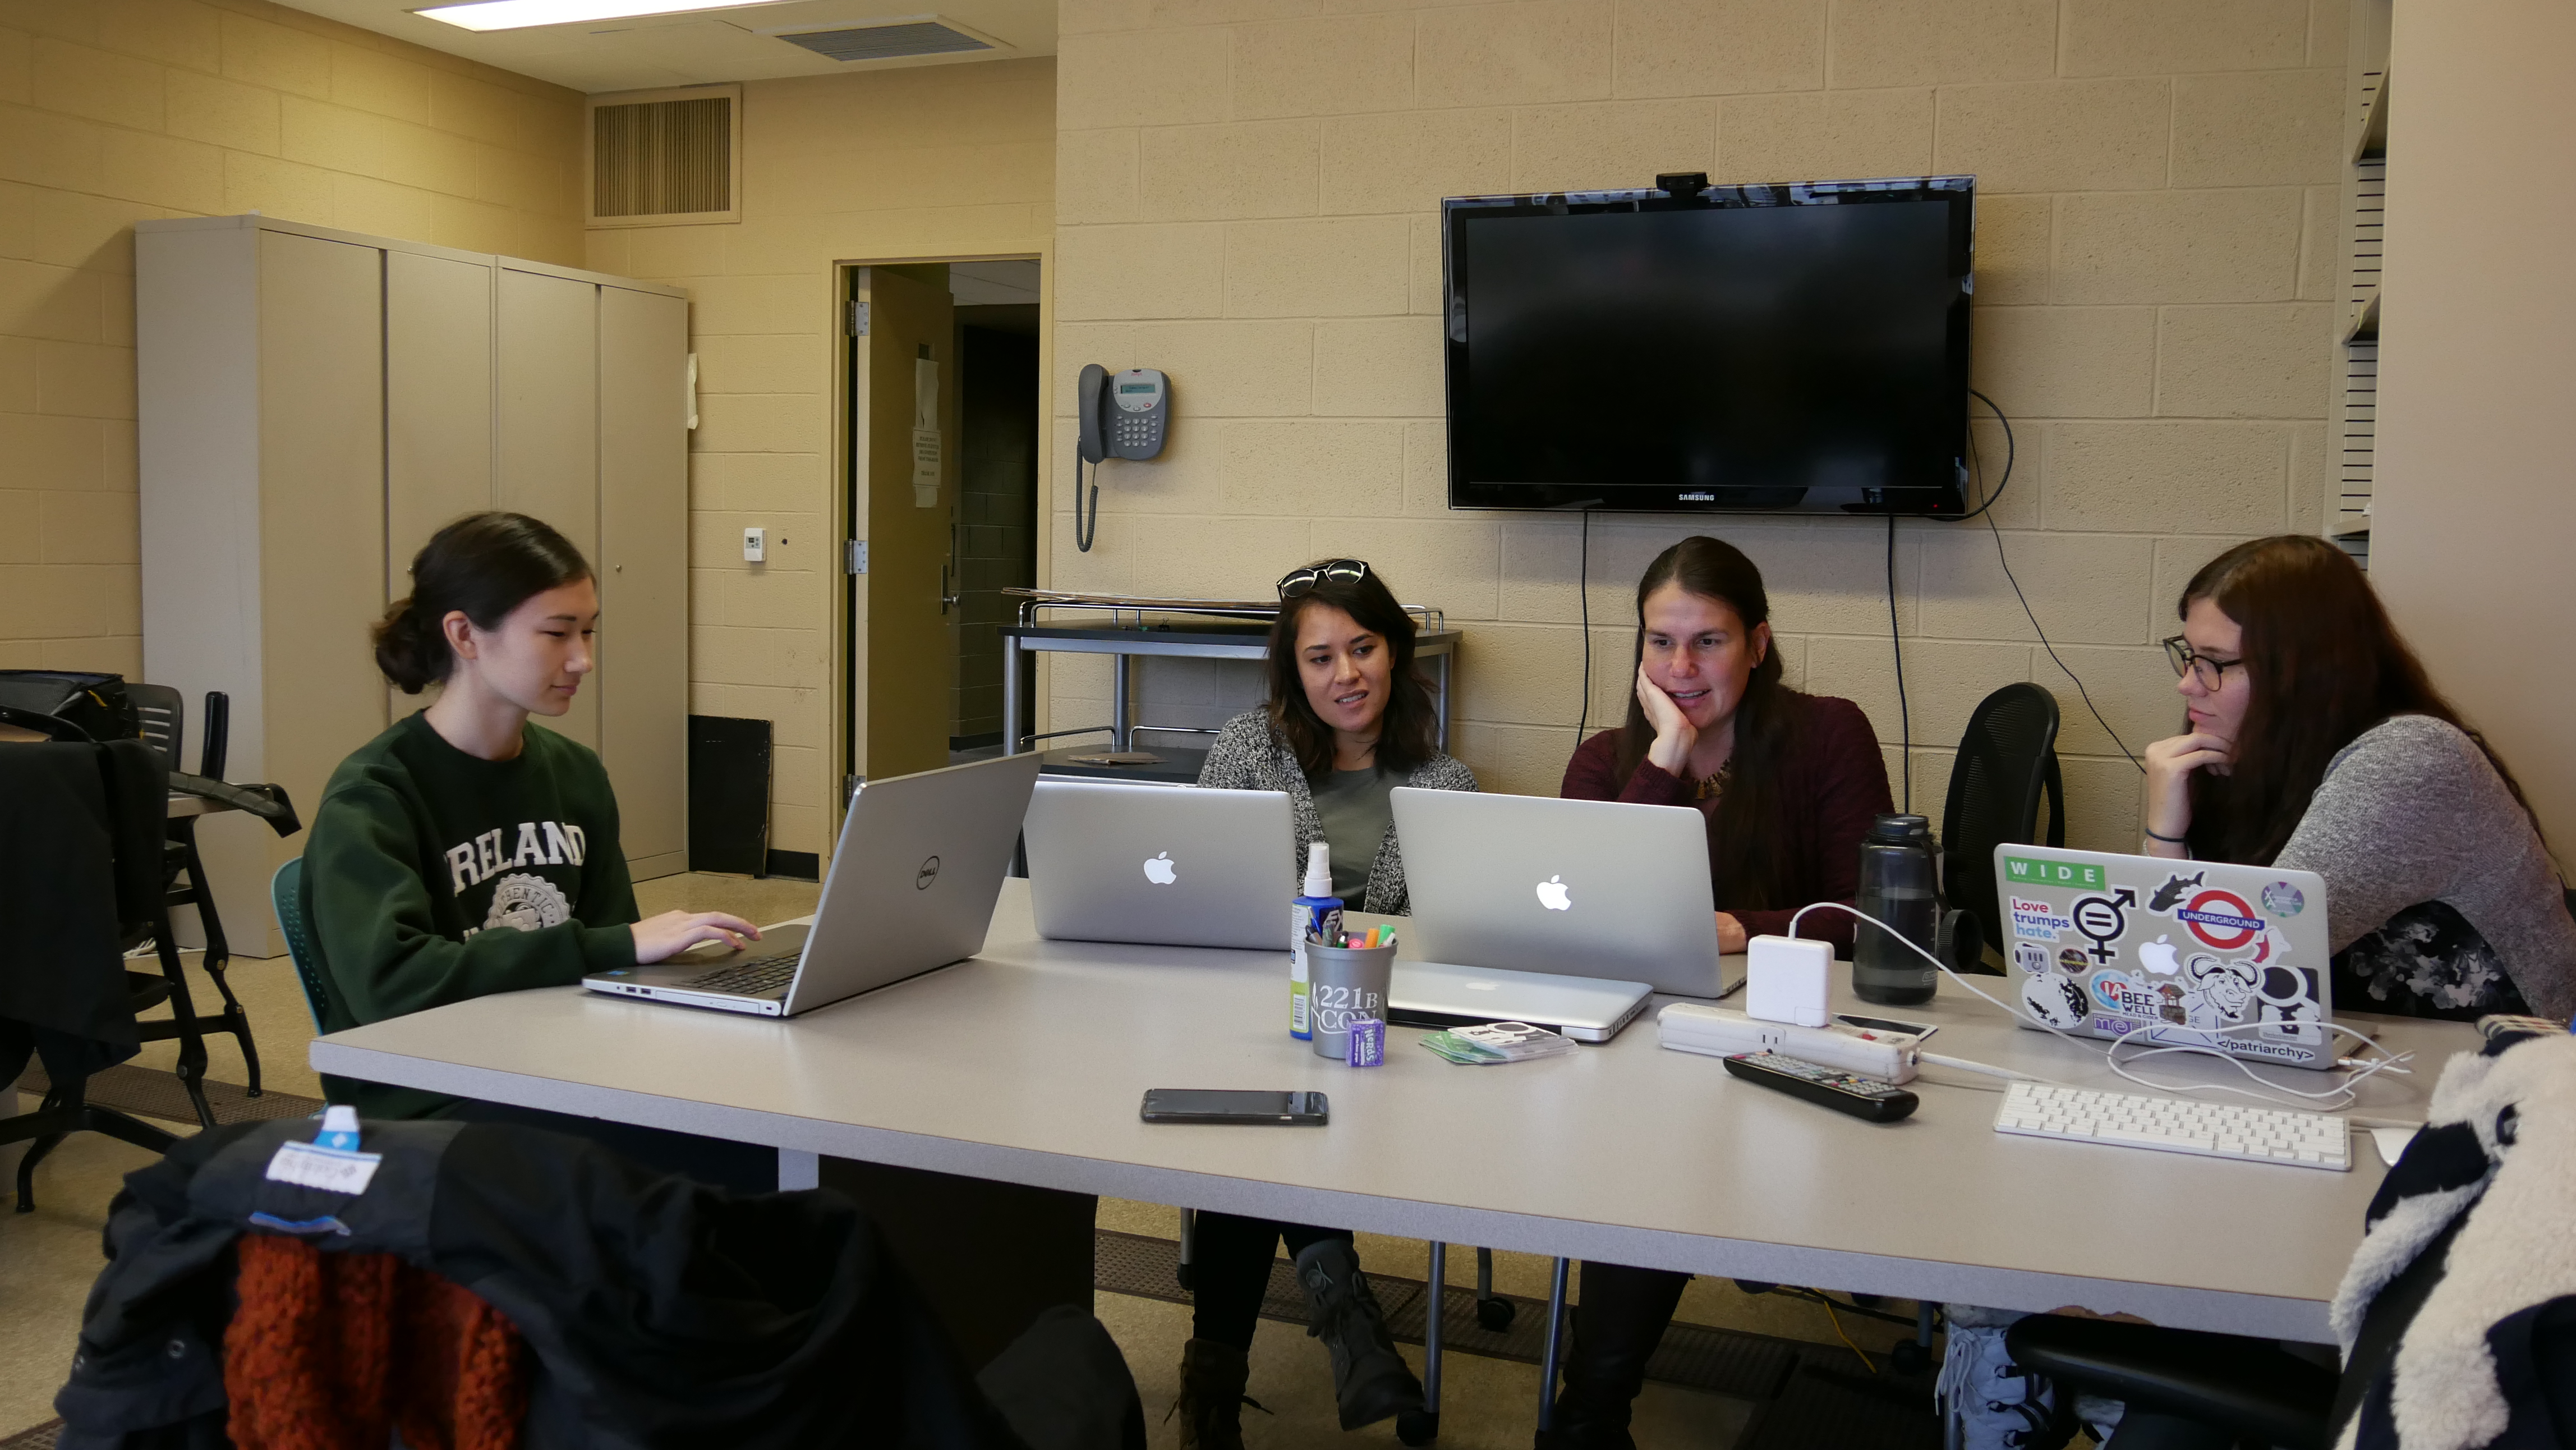 The 2017 agnès films team at work. Pictured from left to right: Samantha Fegan, Jessica Kukla, Alexandra Hidalgo, and Hannah Countryman. Photo by Valeria Obando.